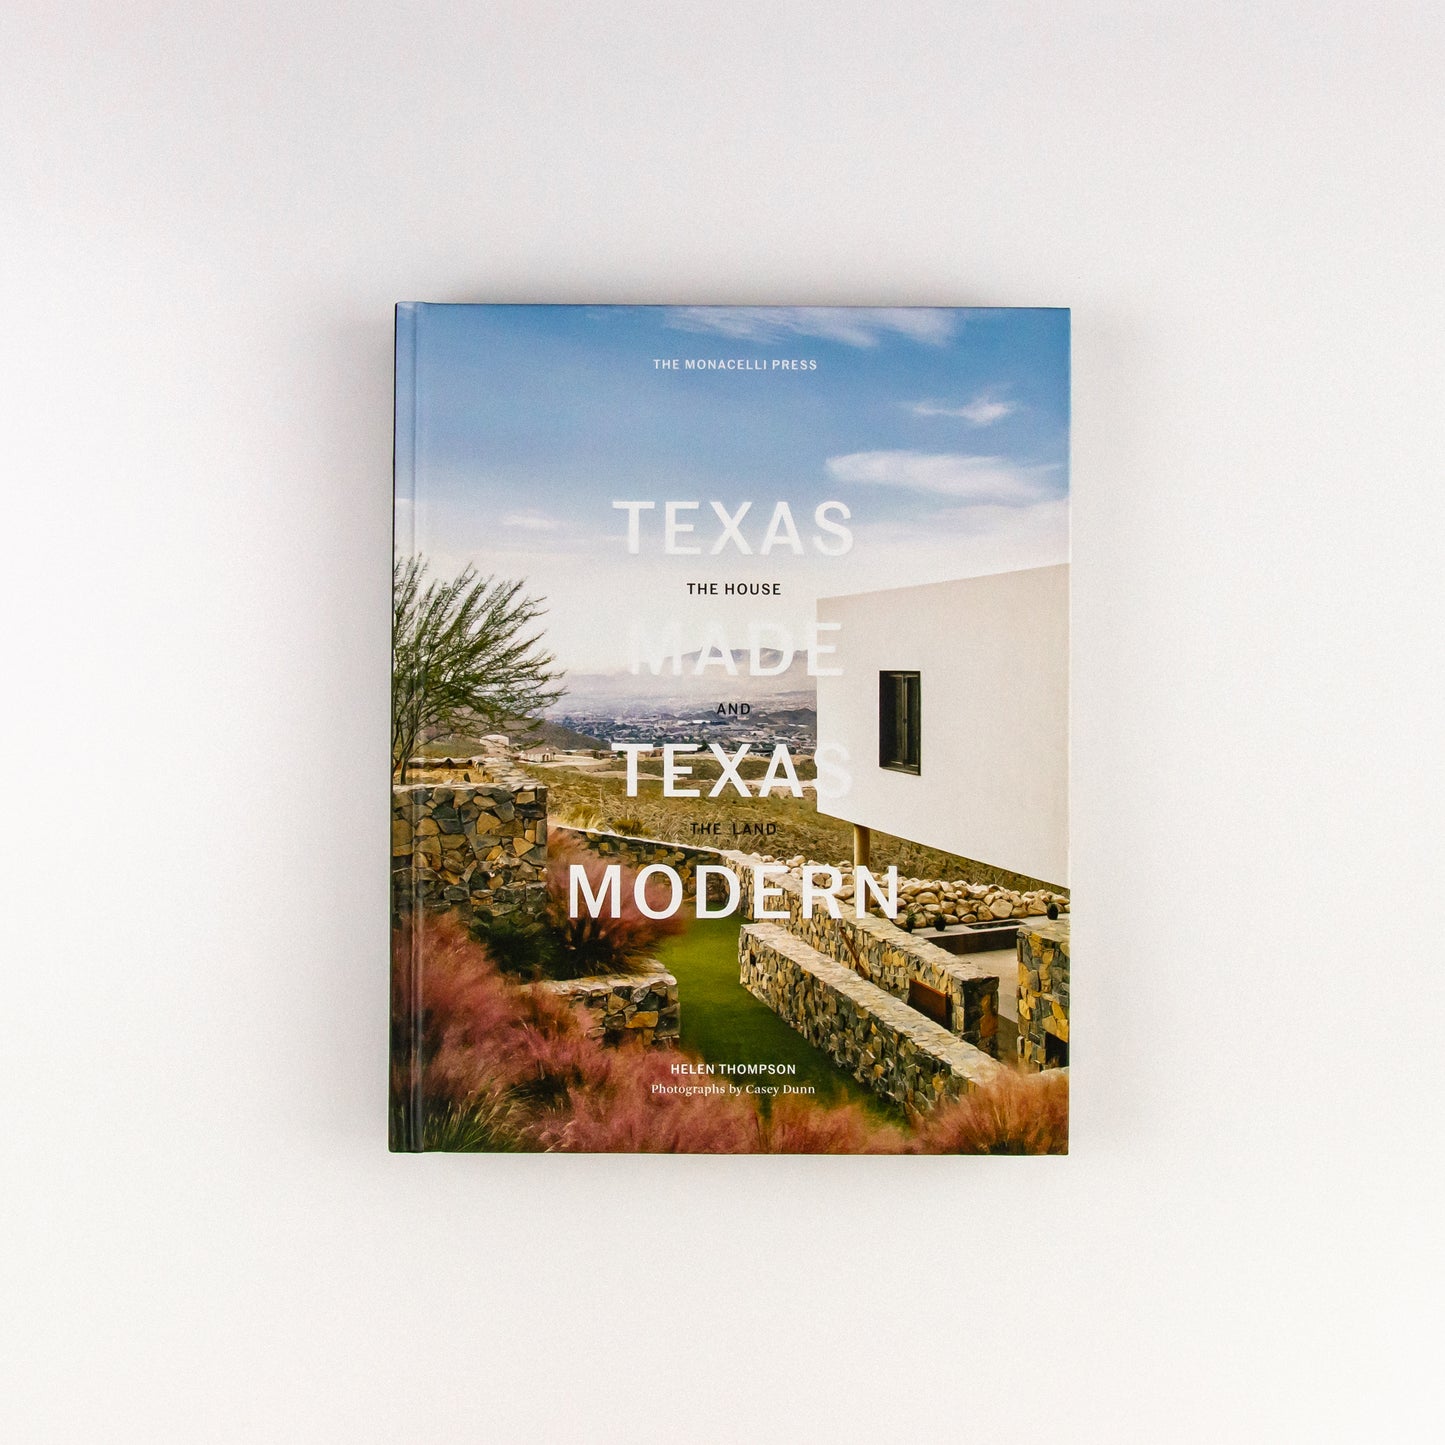 TEXAS MADE / TEXAS MODERN: THE HOUSE AND THE LAND